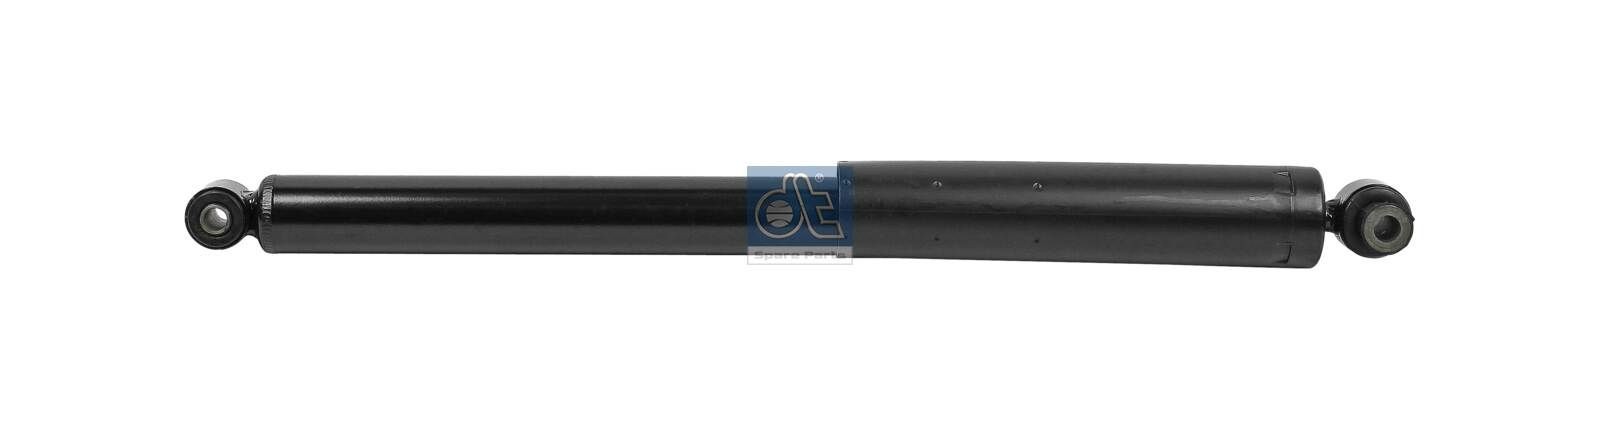 313 509 DT Spare Parts 13.17164 Shock absorber 6C11-18080-BC